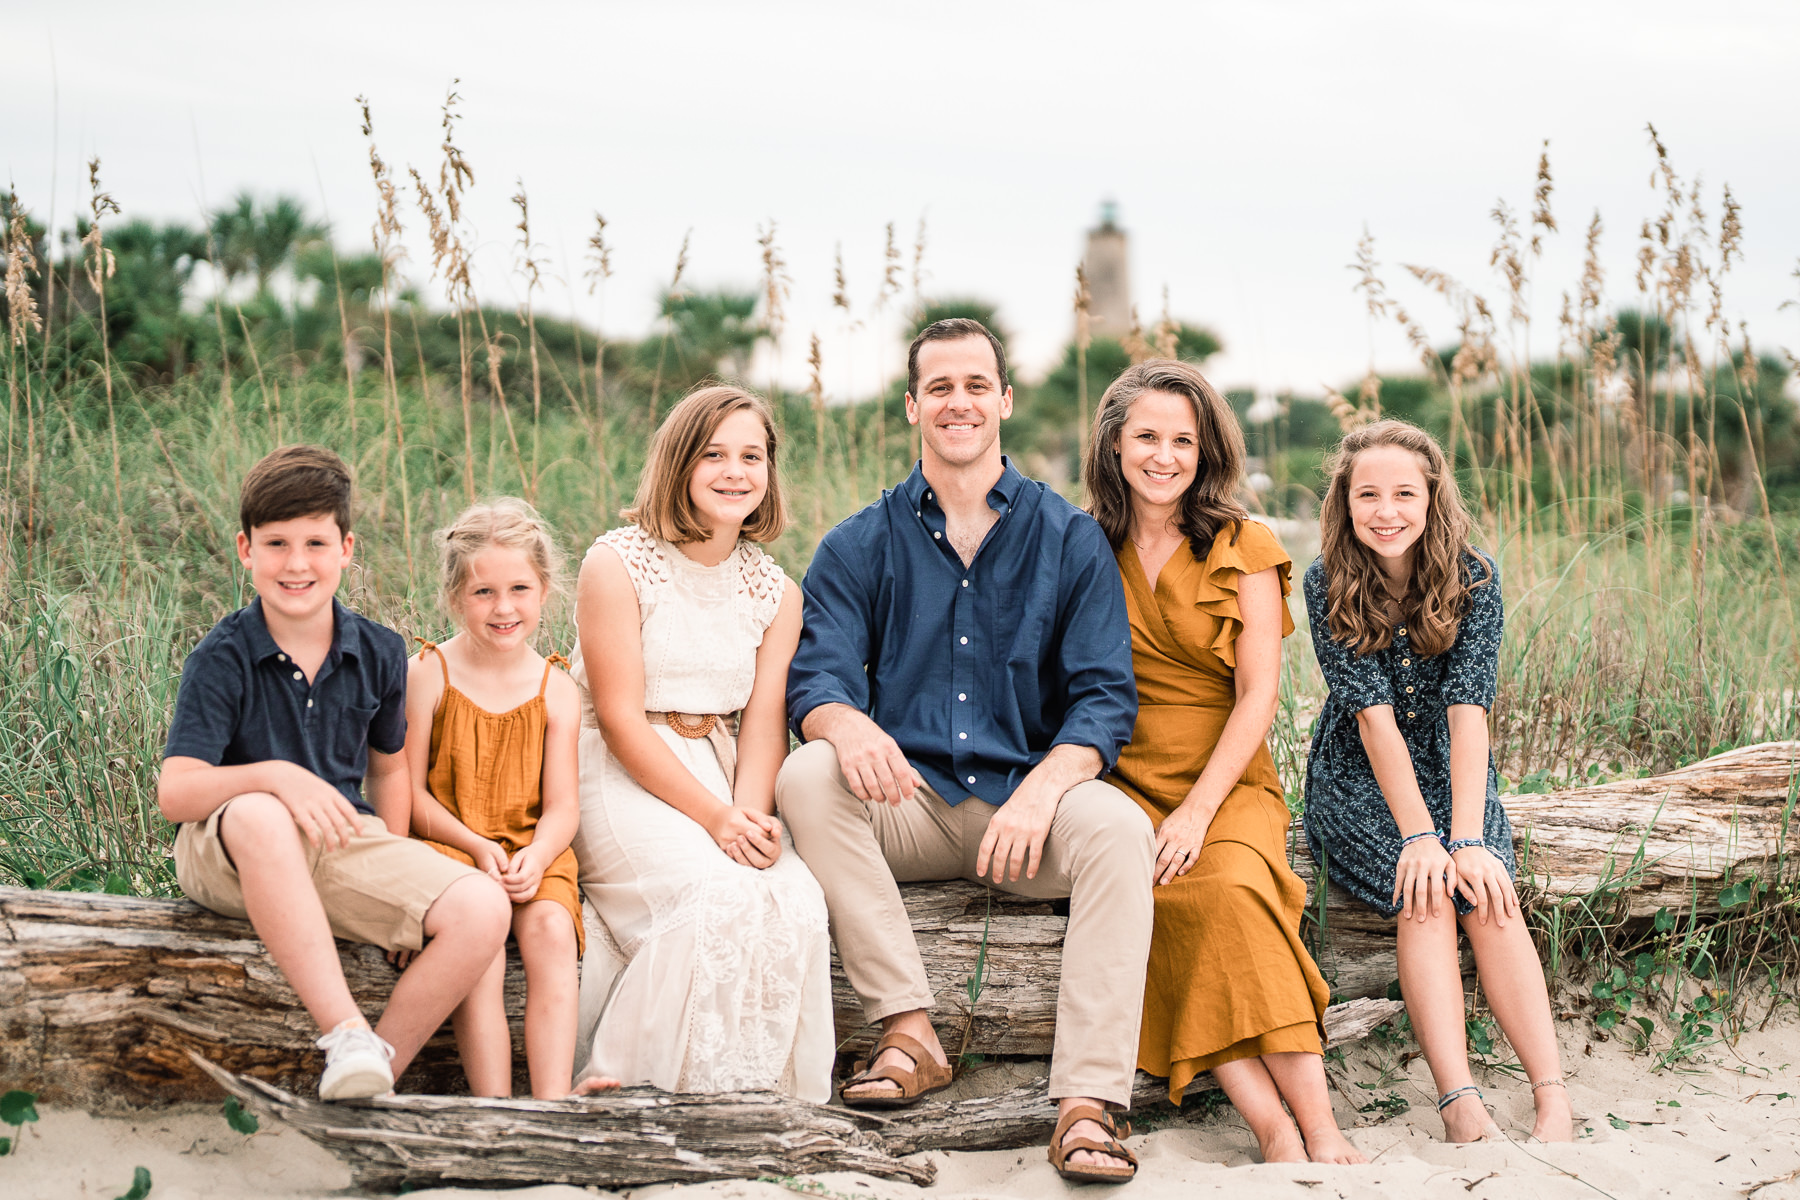 Wilmington NC Family Photographer - Family Photography - Family Portraits - Photo of Family on the beach - What to wear for family photo session ideas - Wilmingotn NC Family Photography - Chris Lang Photography